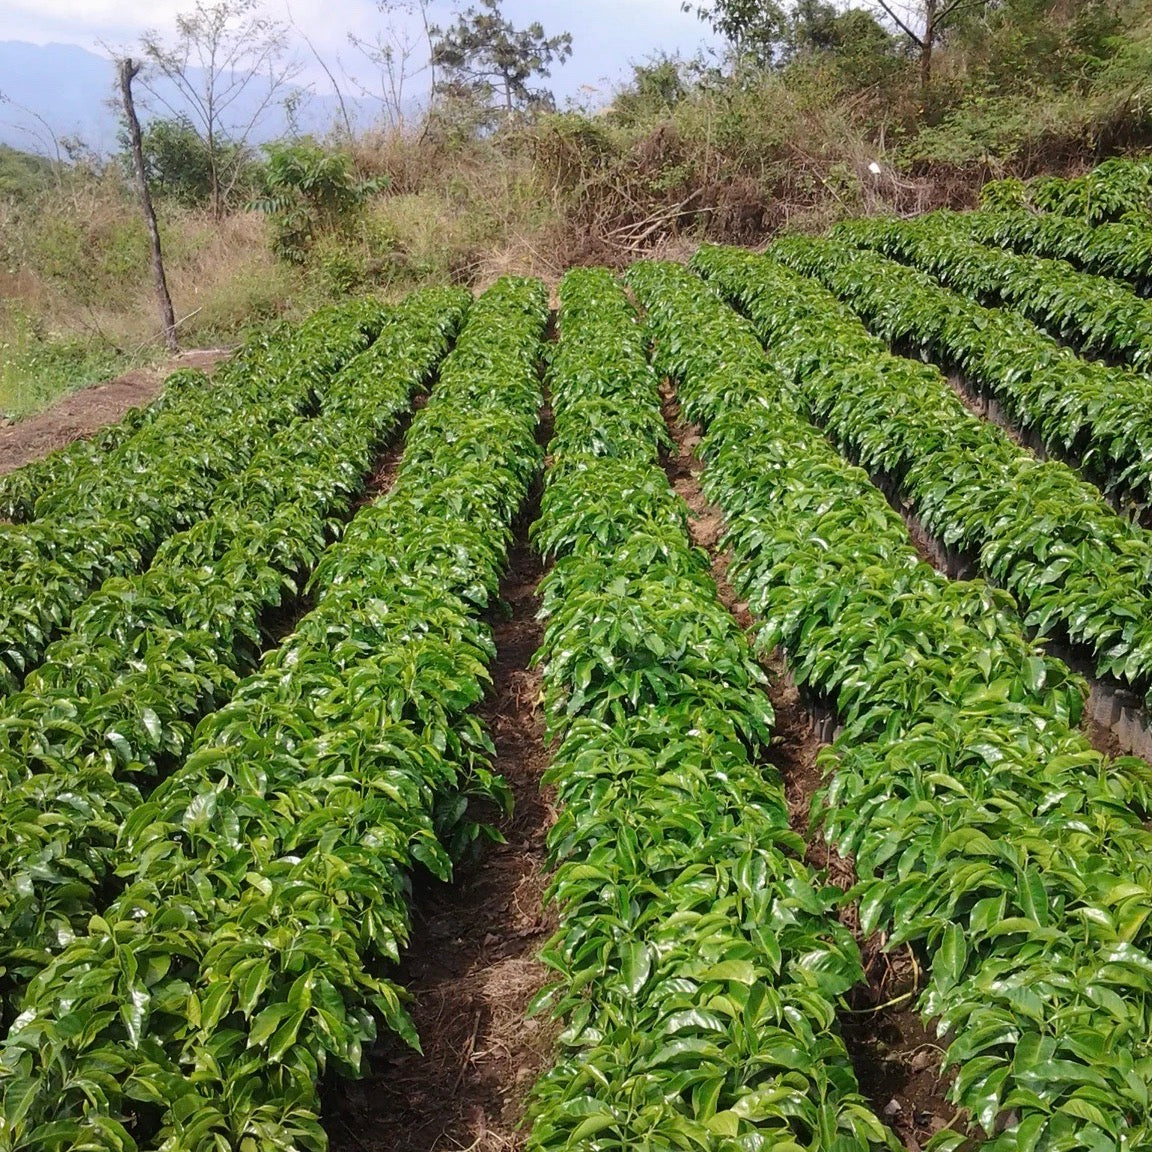 Young coffee plants at the nursery, La Colina